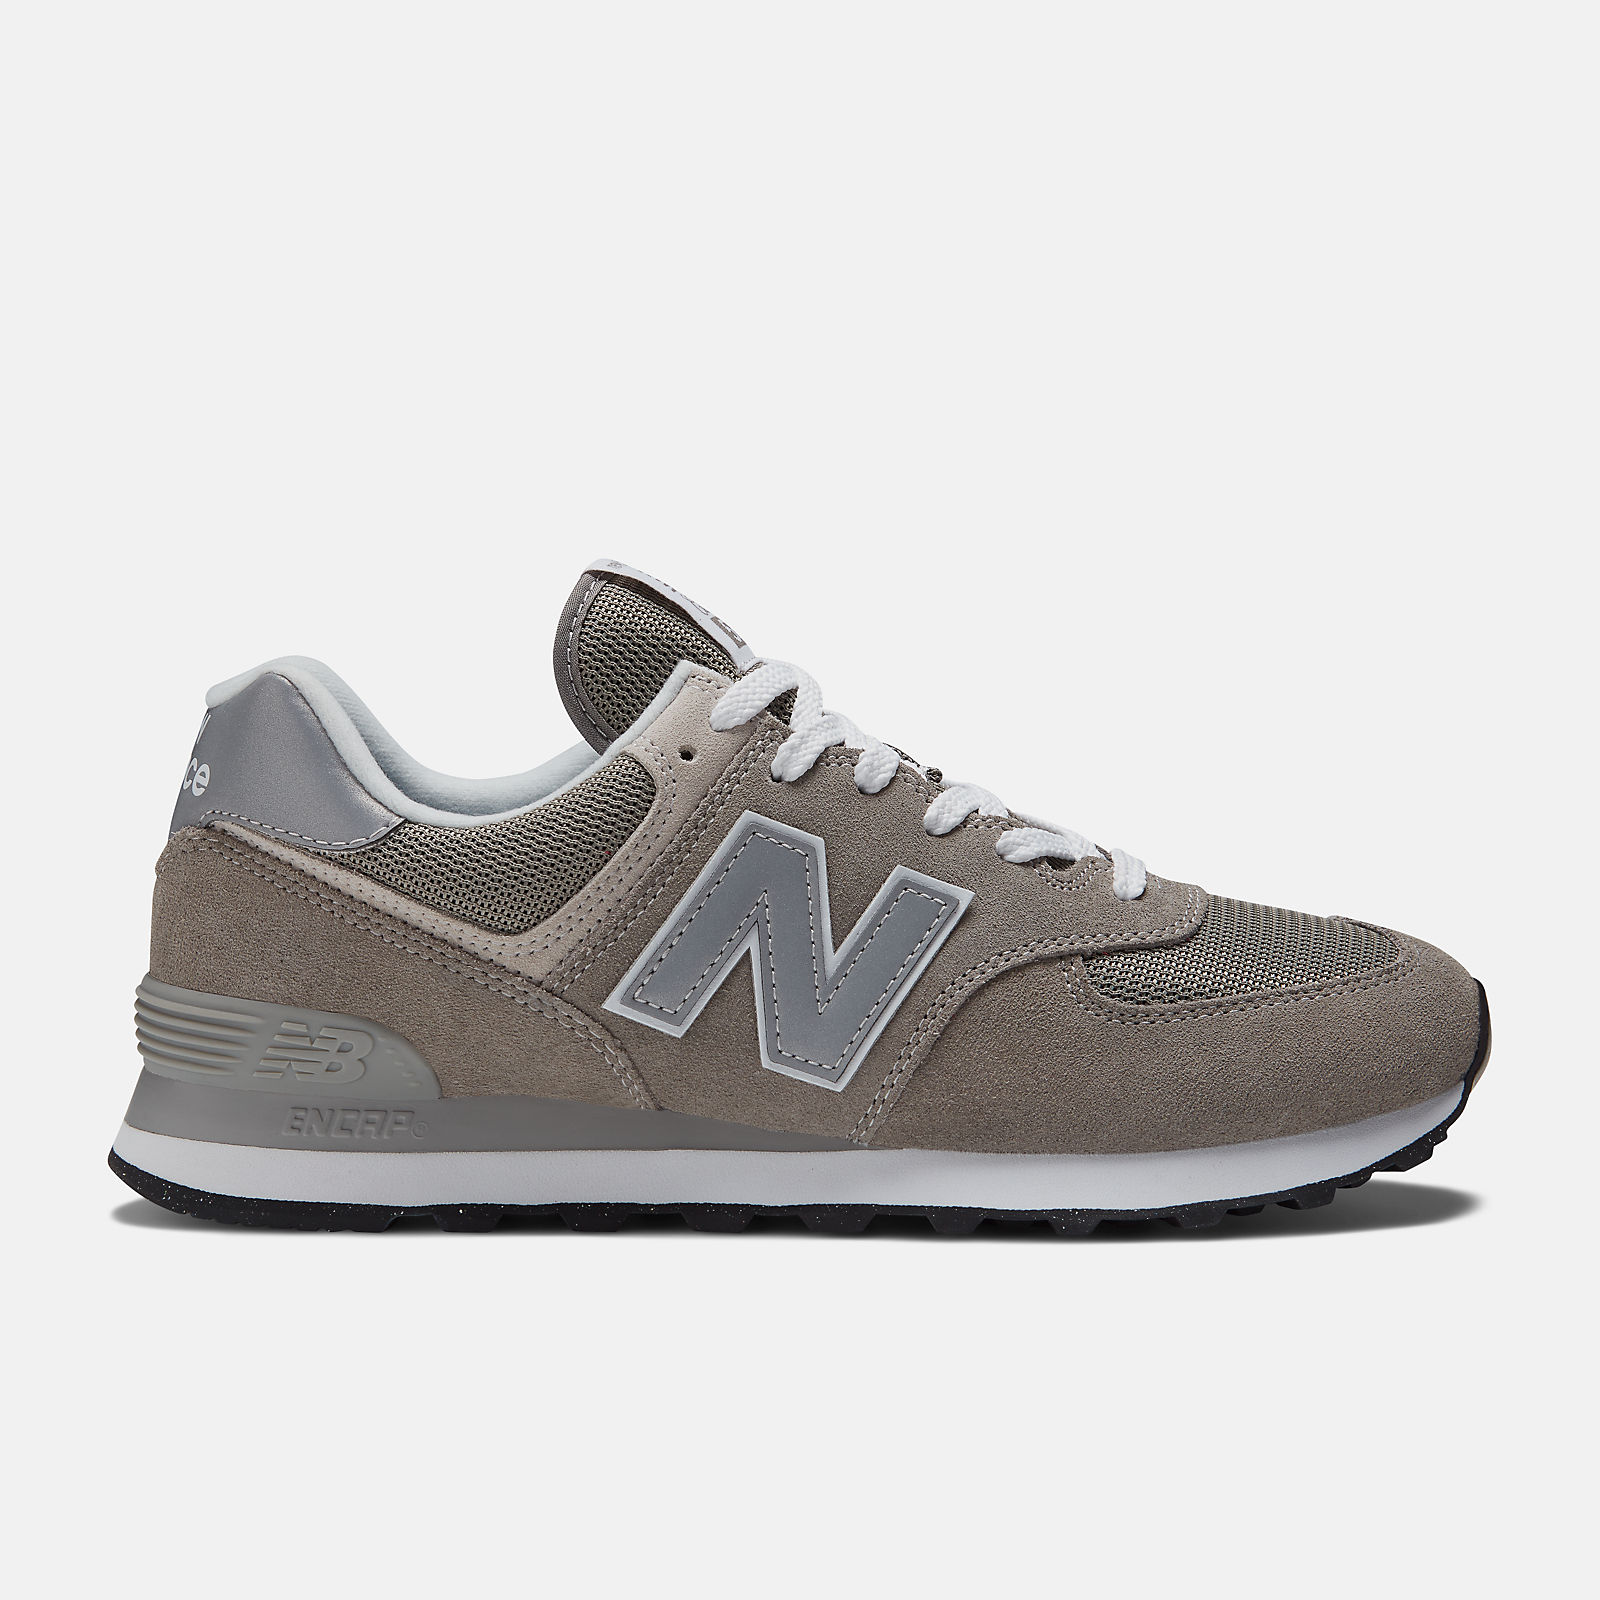 Execution Also Shredded 574 Core - New Balance